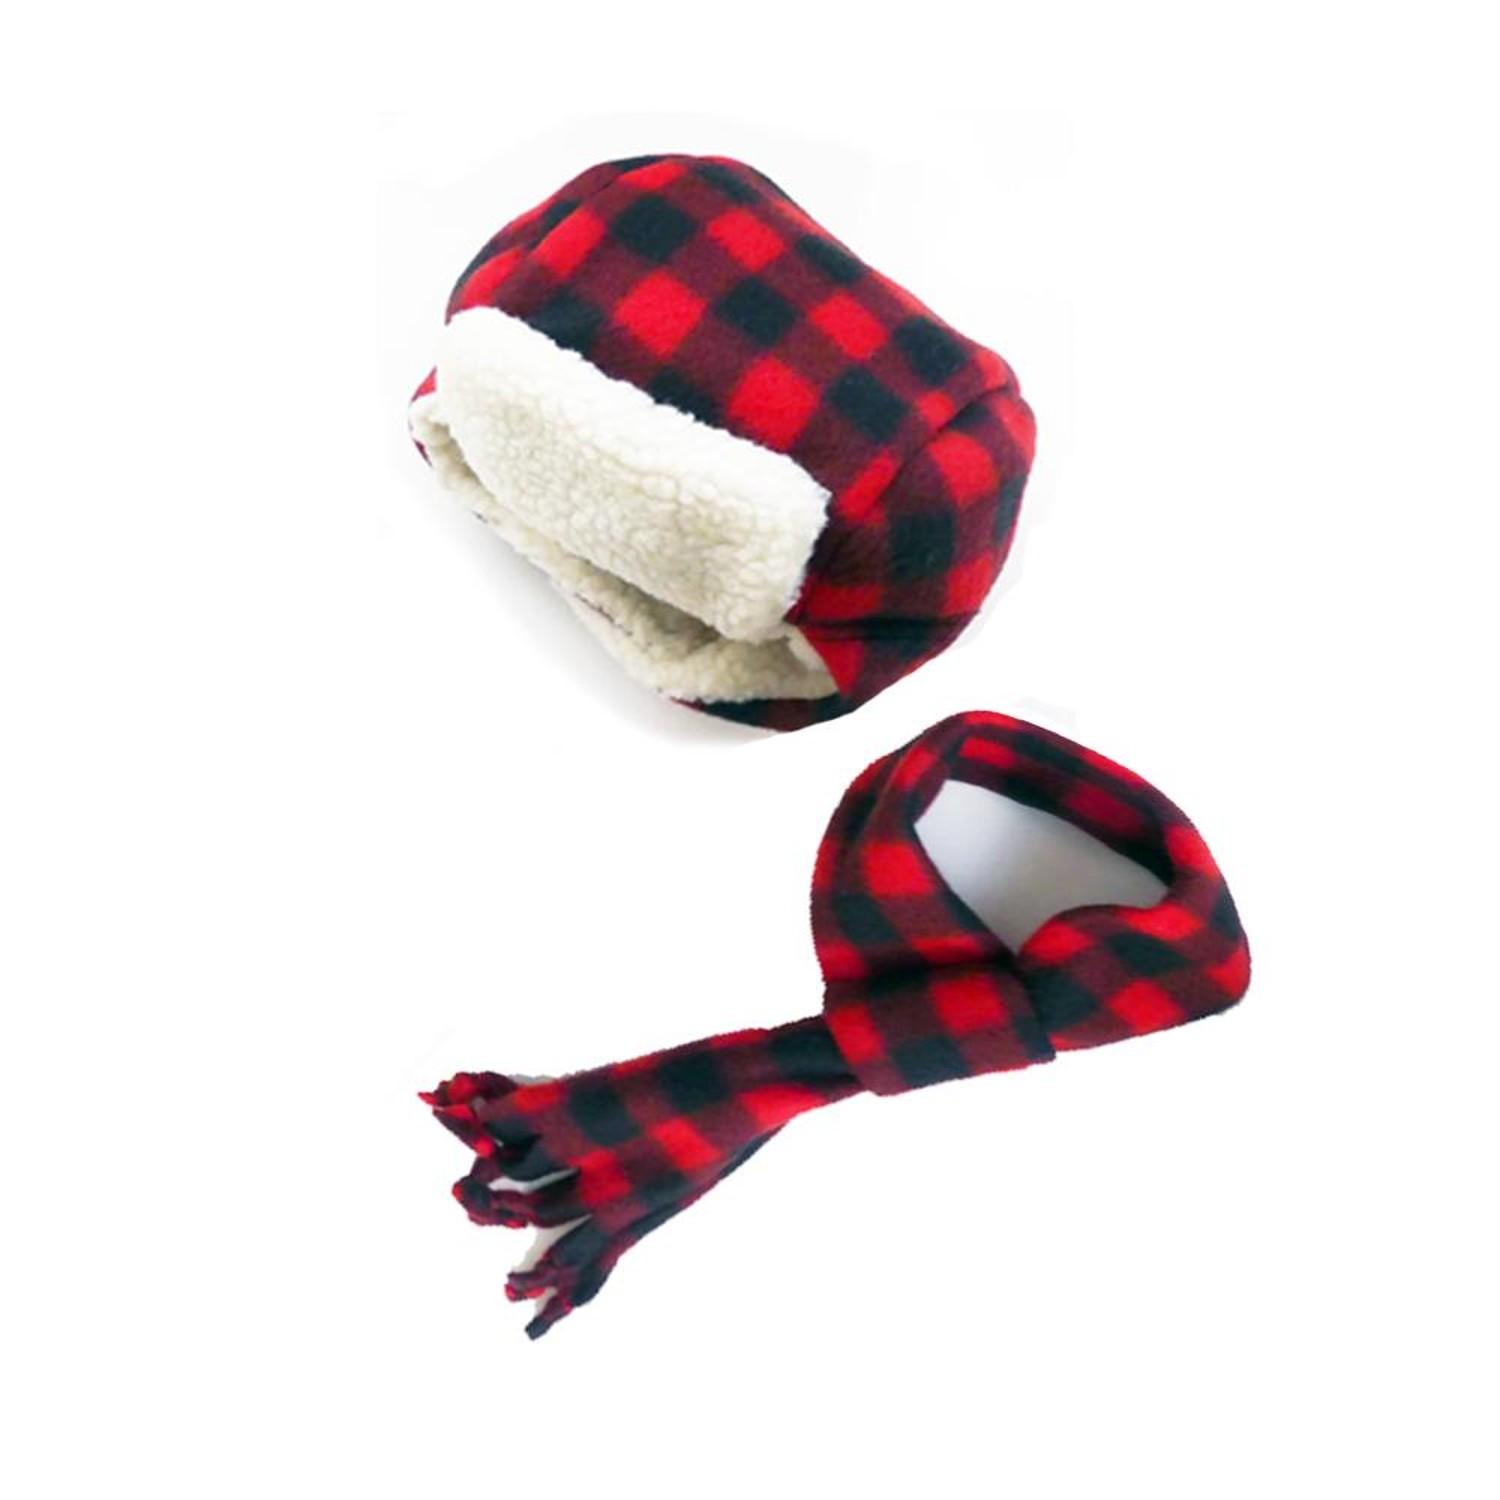 My Canine Kids Aviator Hat and Scarf Set for Dogs - Red Buffalo Plaid